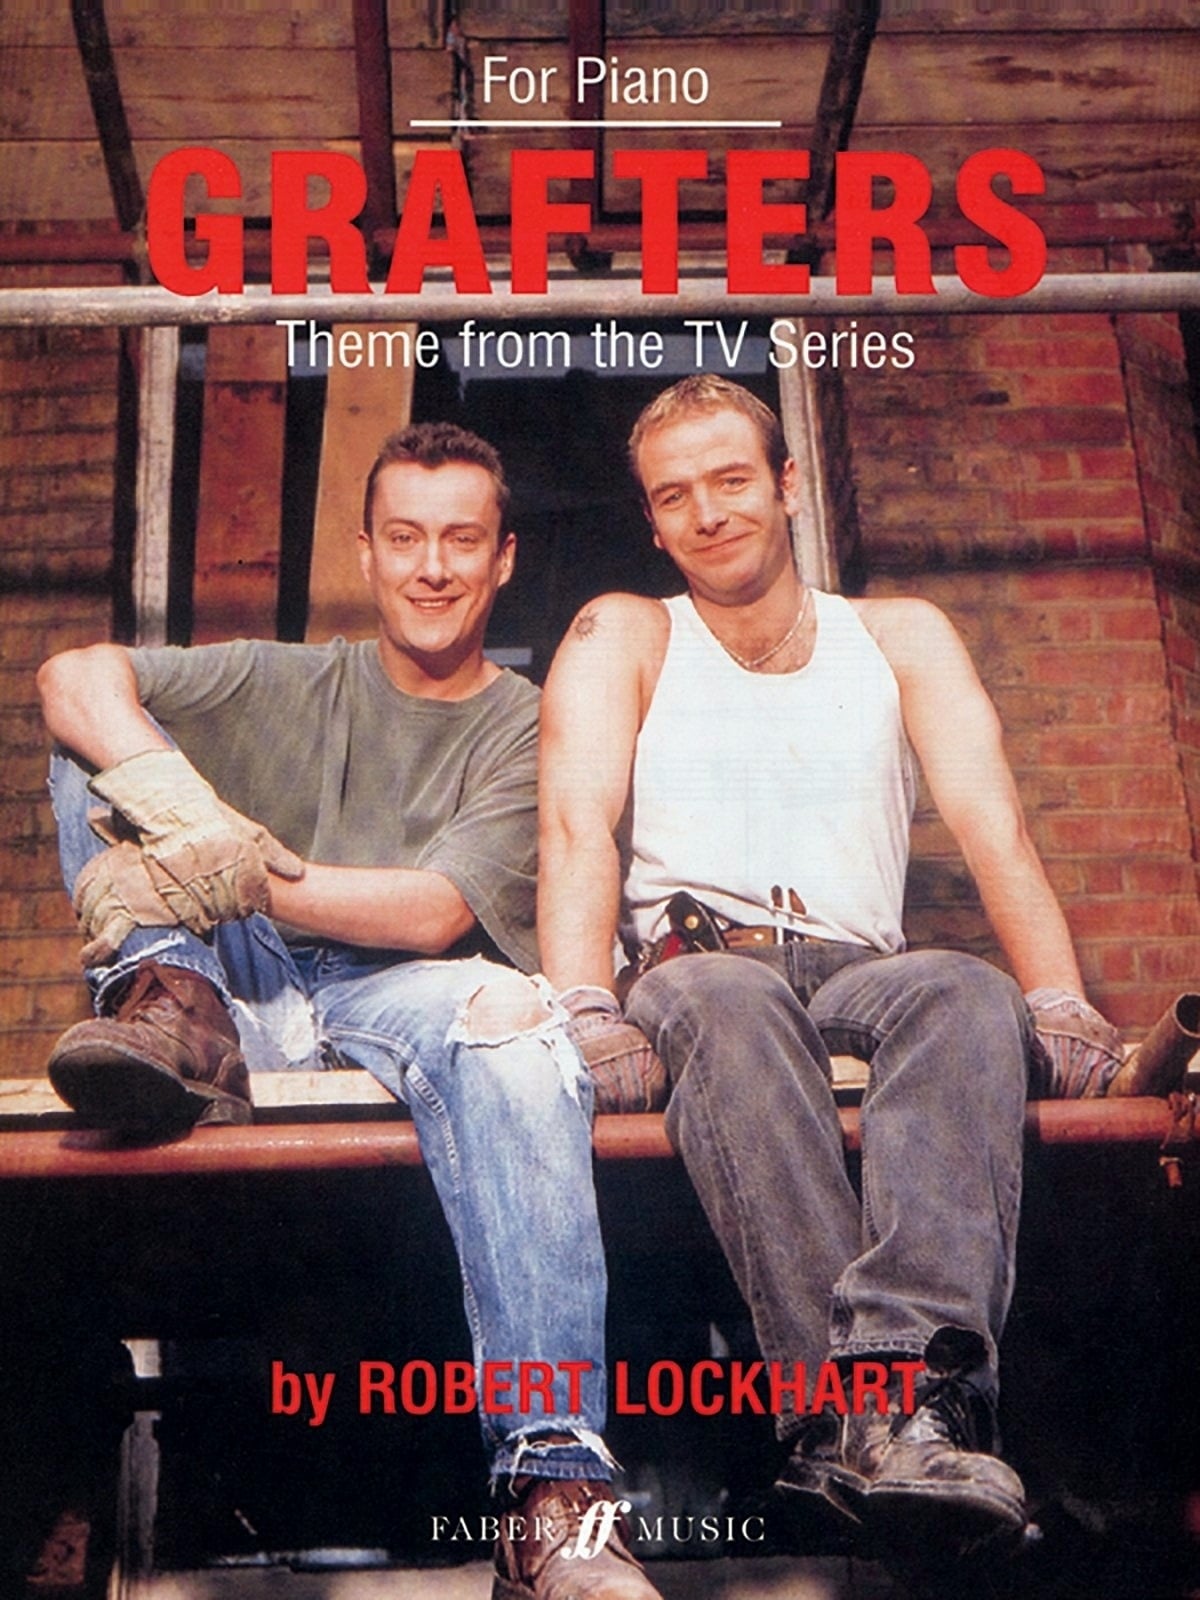 Grafters TV Shows About Working Class